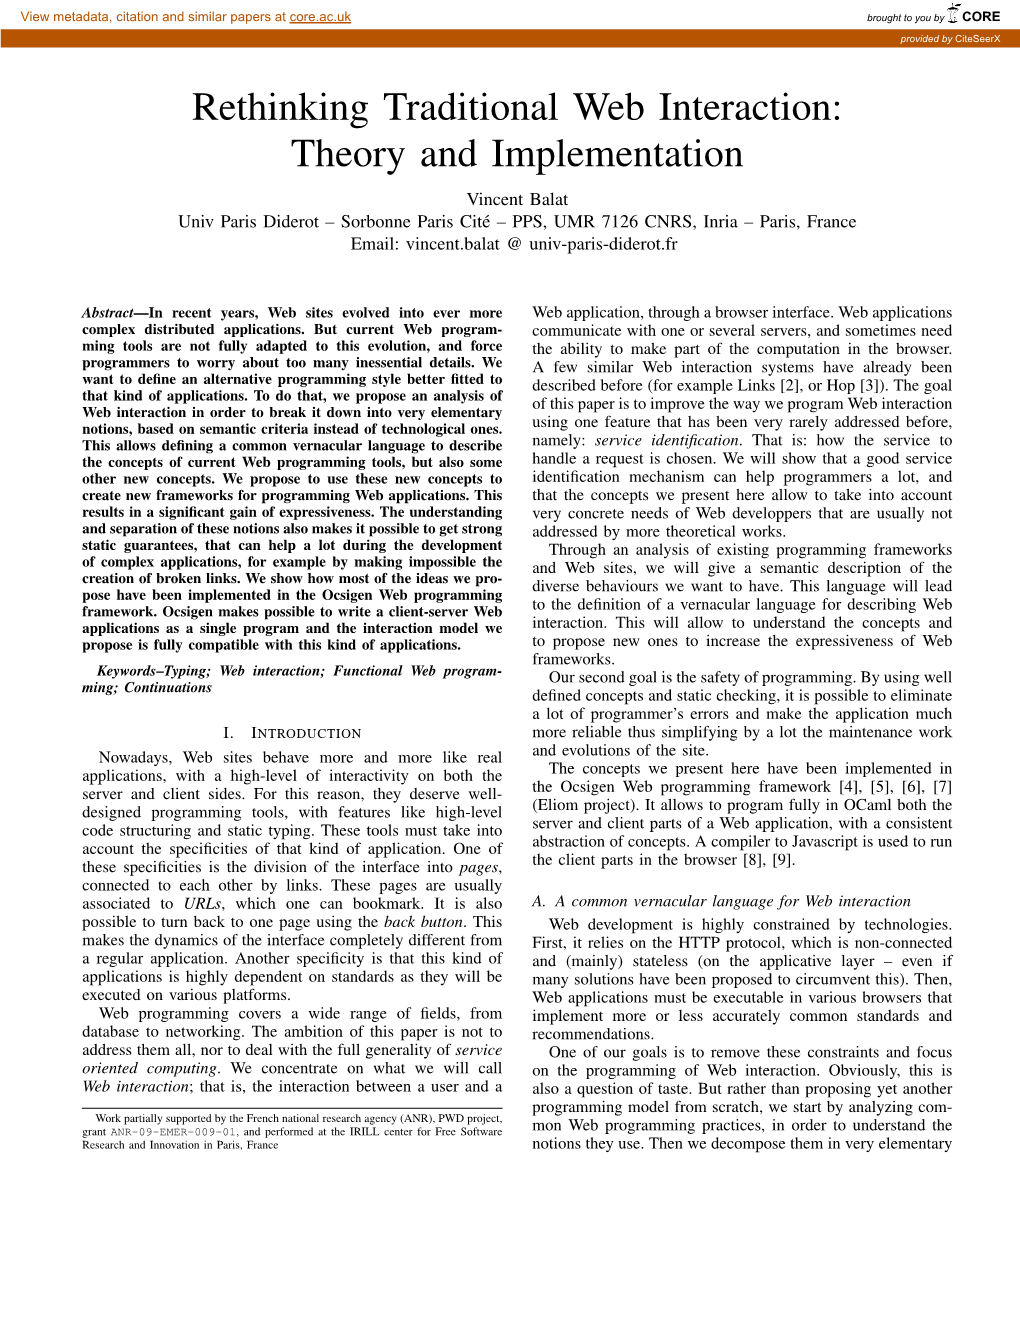 Theory and Implementation